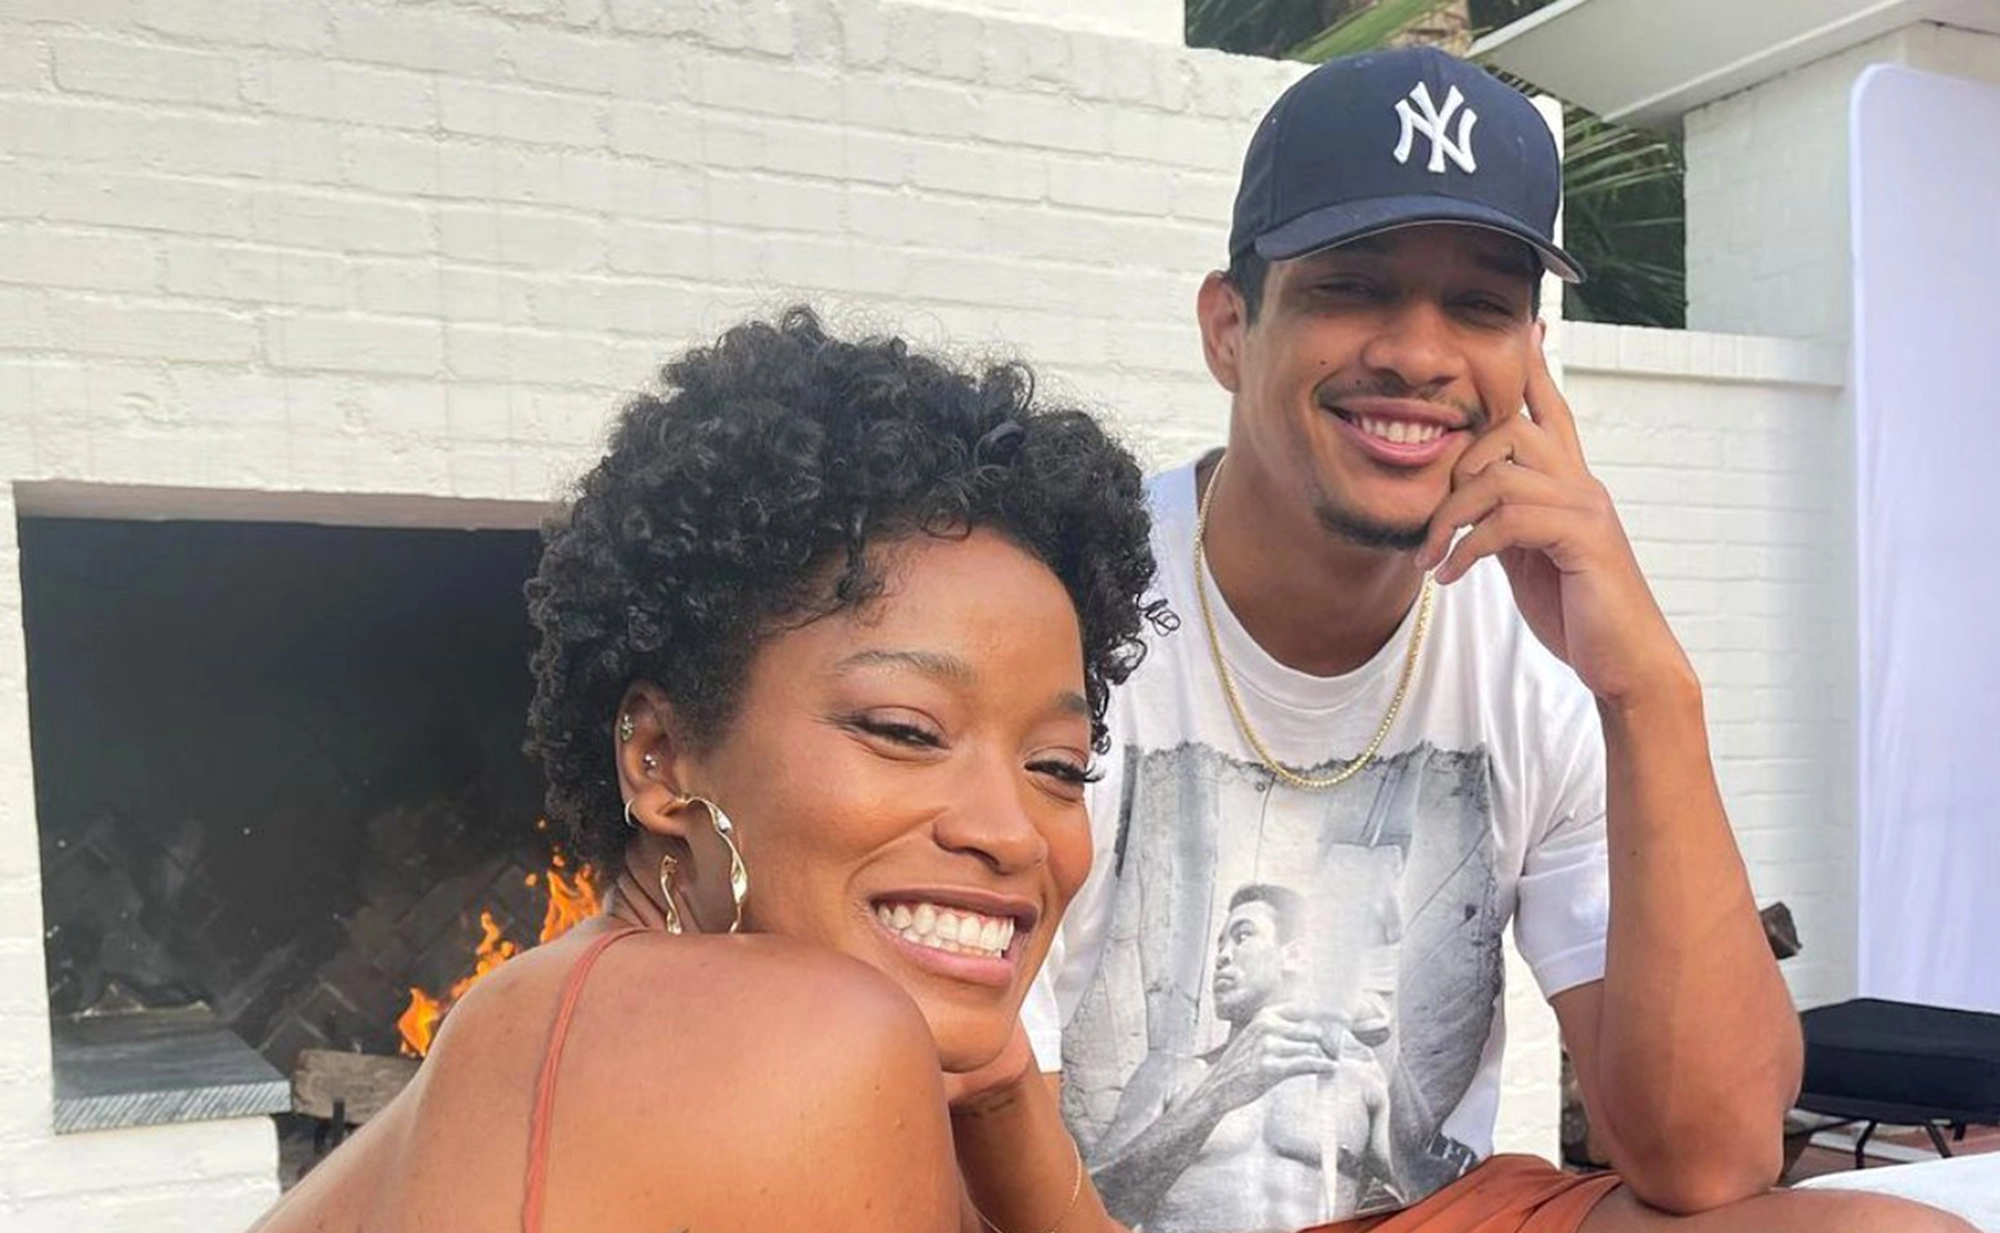 Keke Palmer and Baby Daddy Split … Darius Gets The House and Kid … Keke Gets To Live Like A City Girl!!